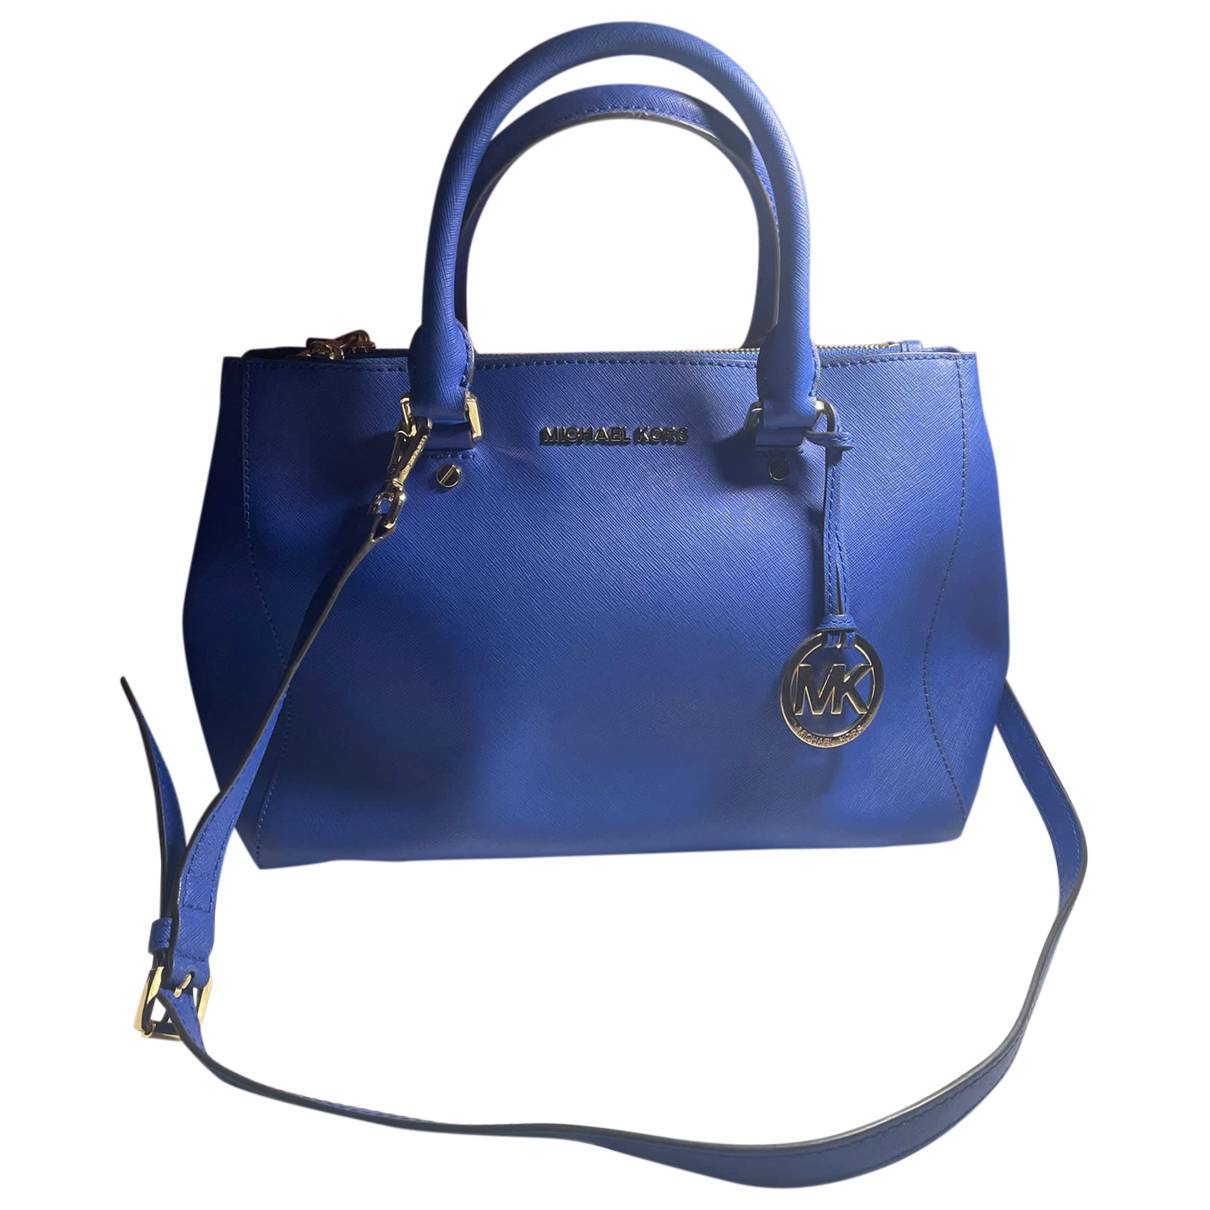 Sutton leather tote Michael Kors Blue in Leather - 20473369